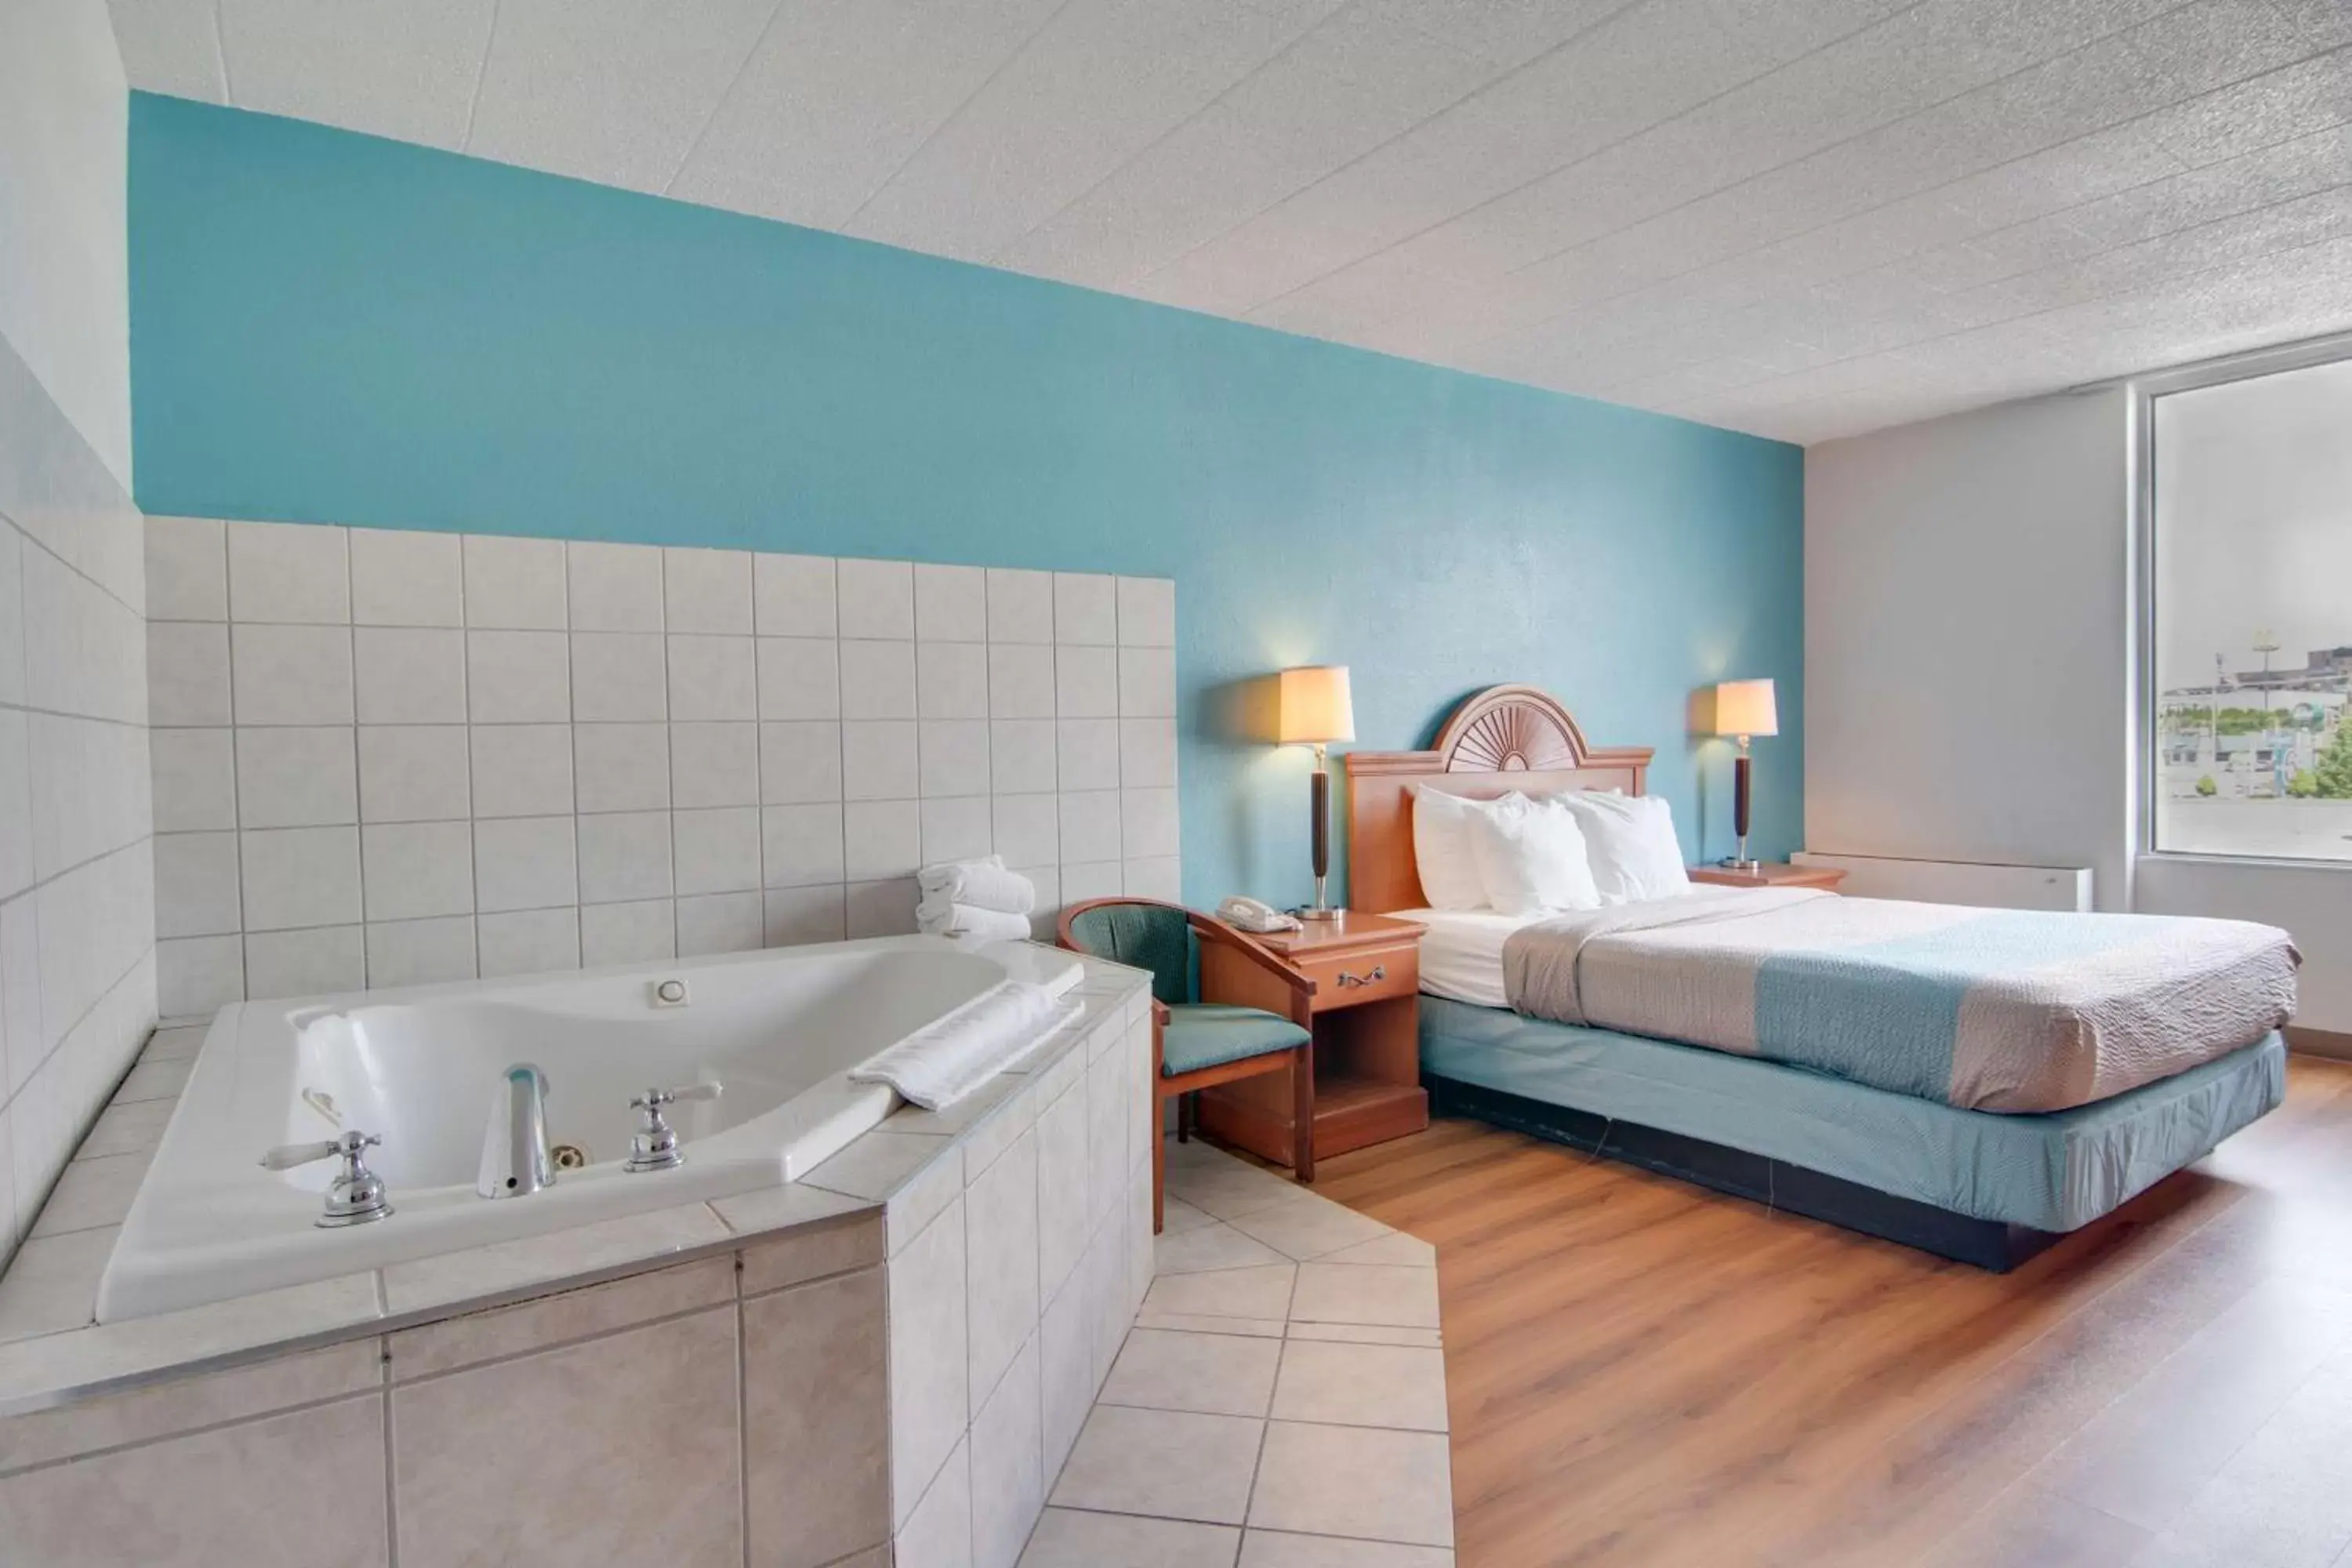 Spa and wellness centre/facilities in Motel 6-Clarion, PA